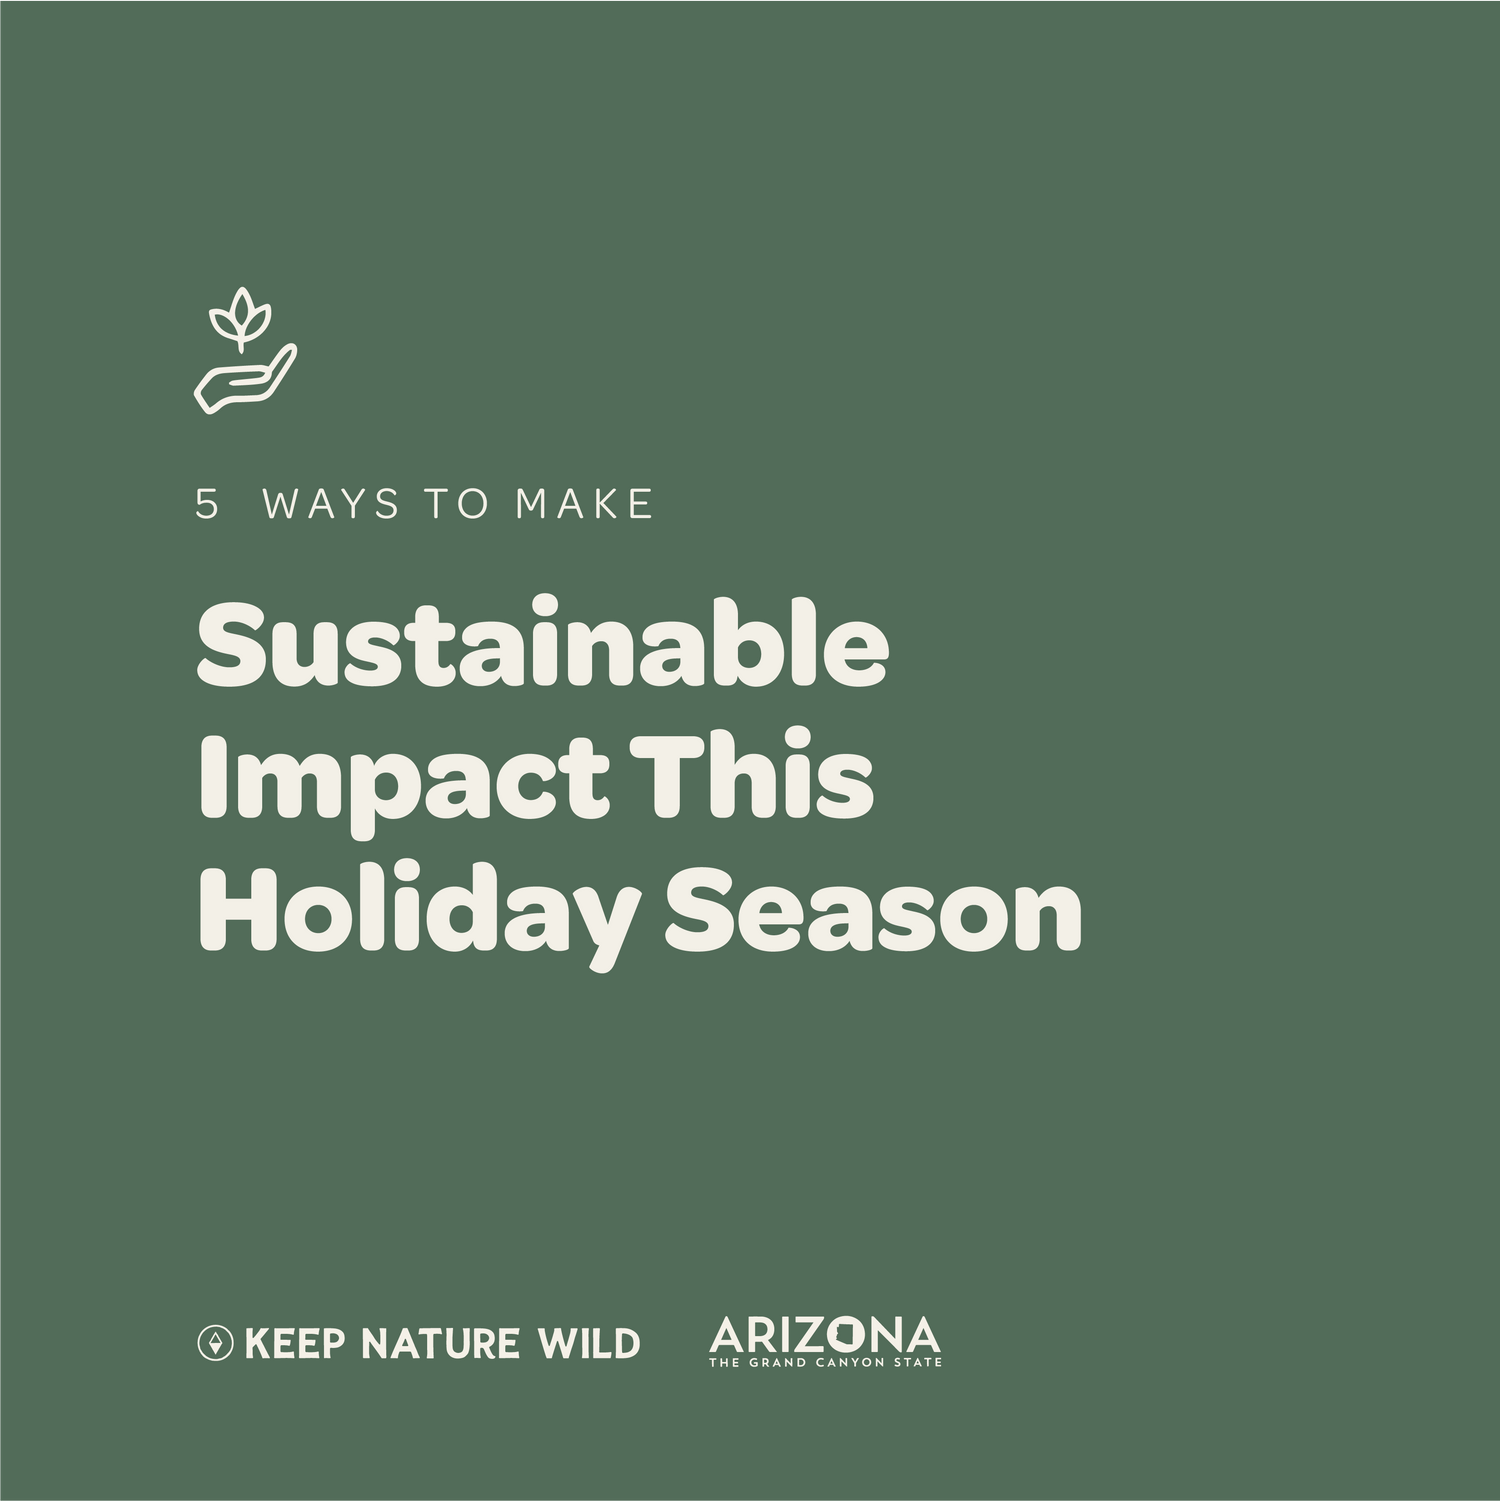 5 Ways to Make a Sustainable Impact This Holiday Season